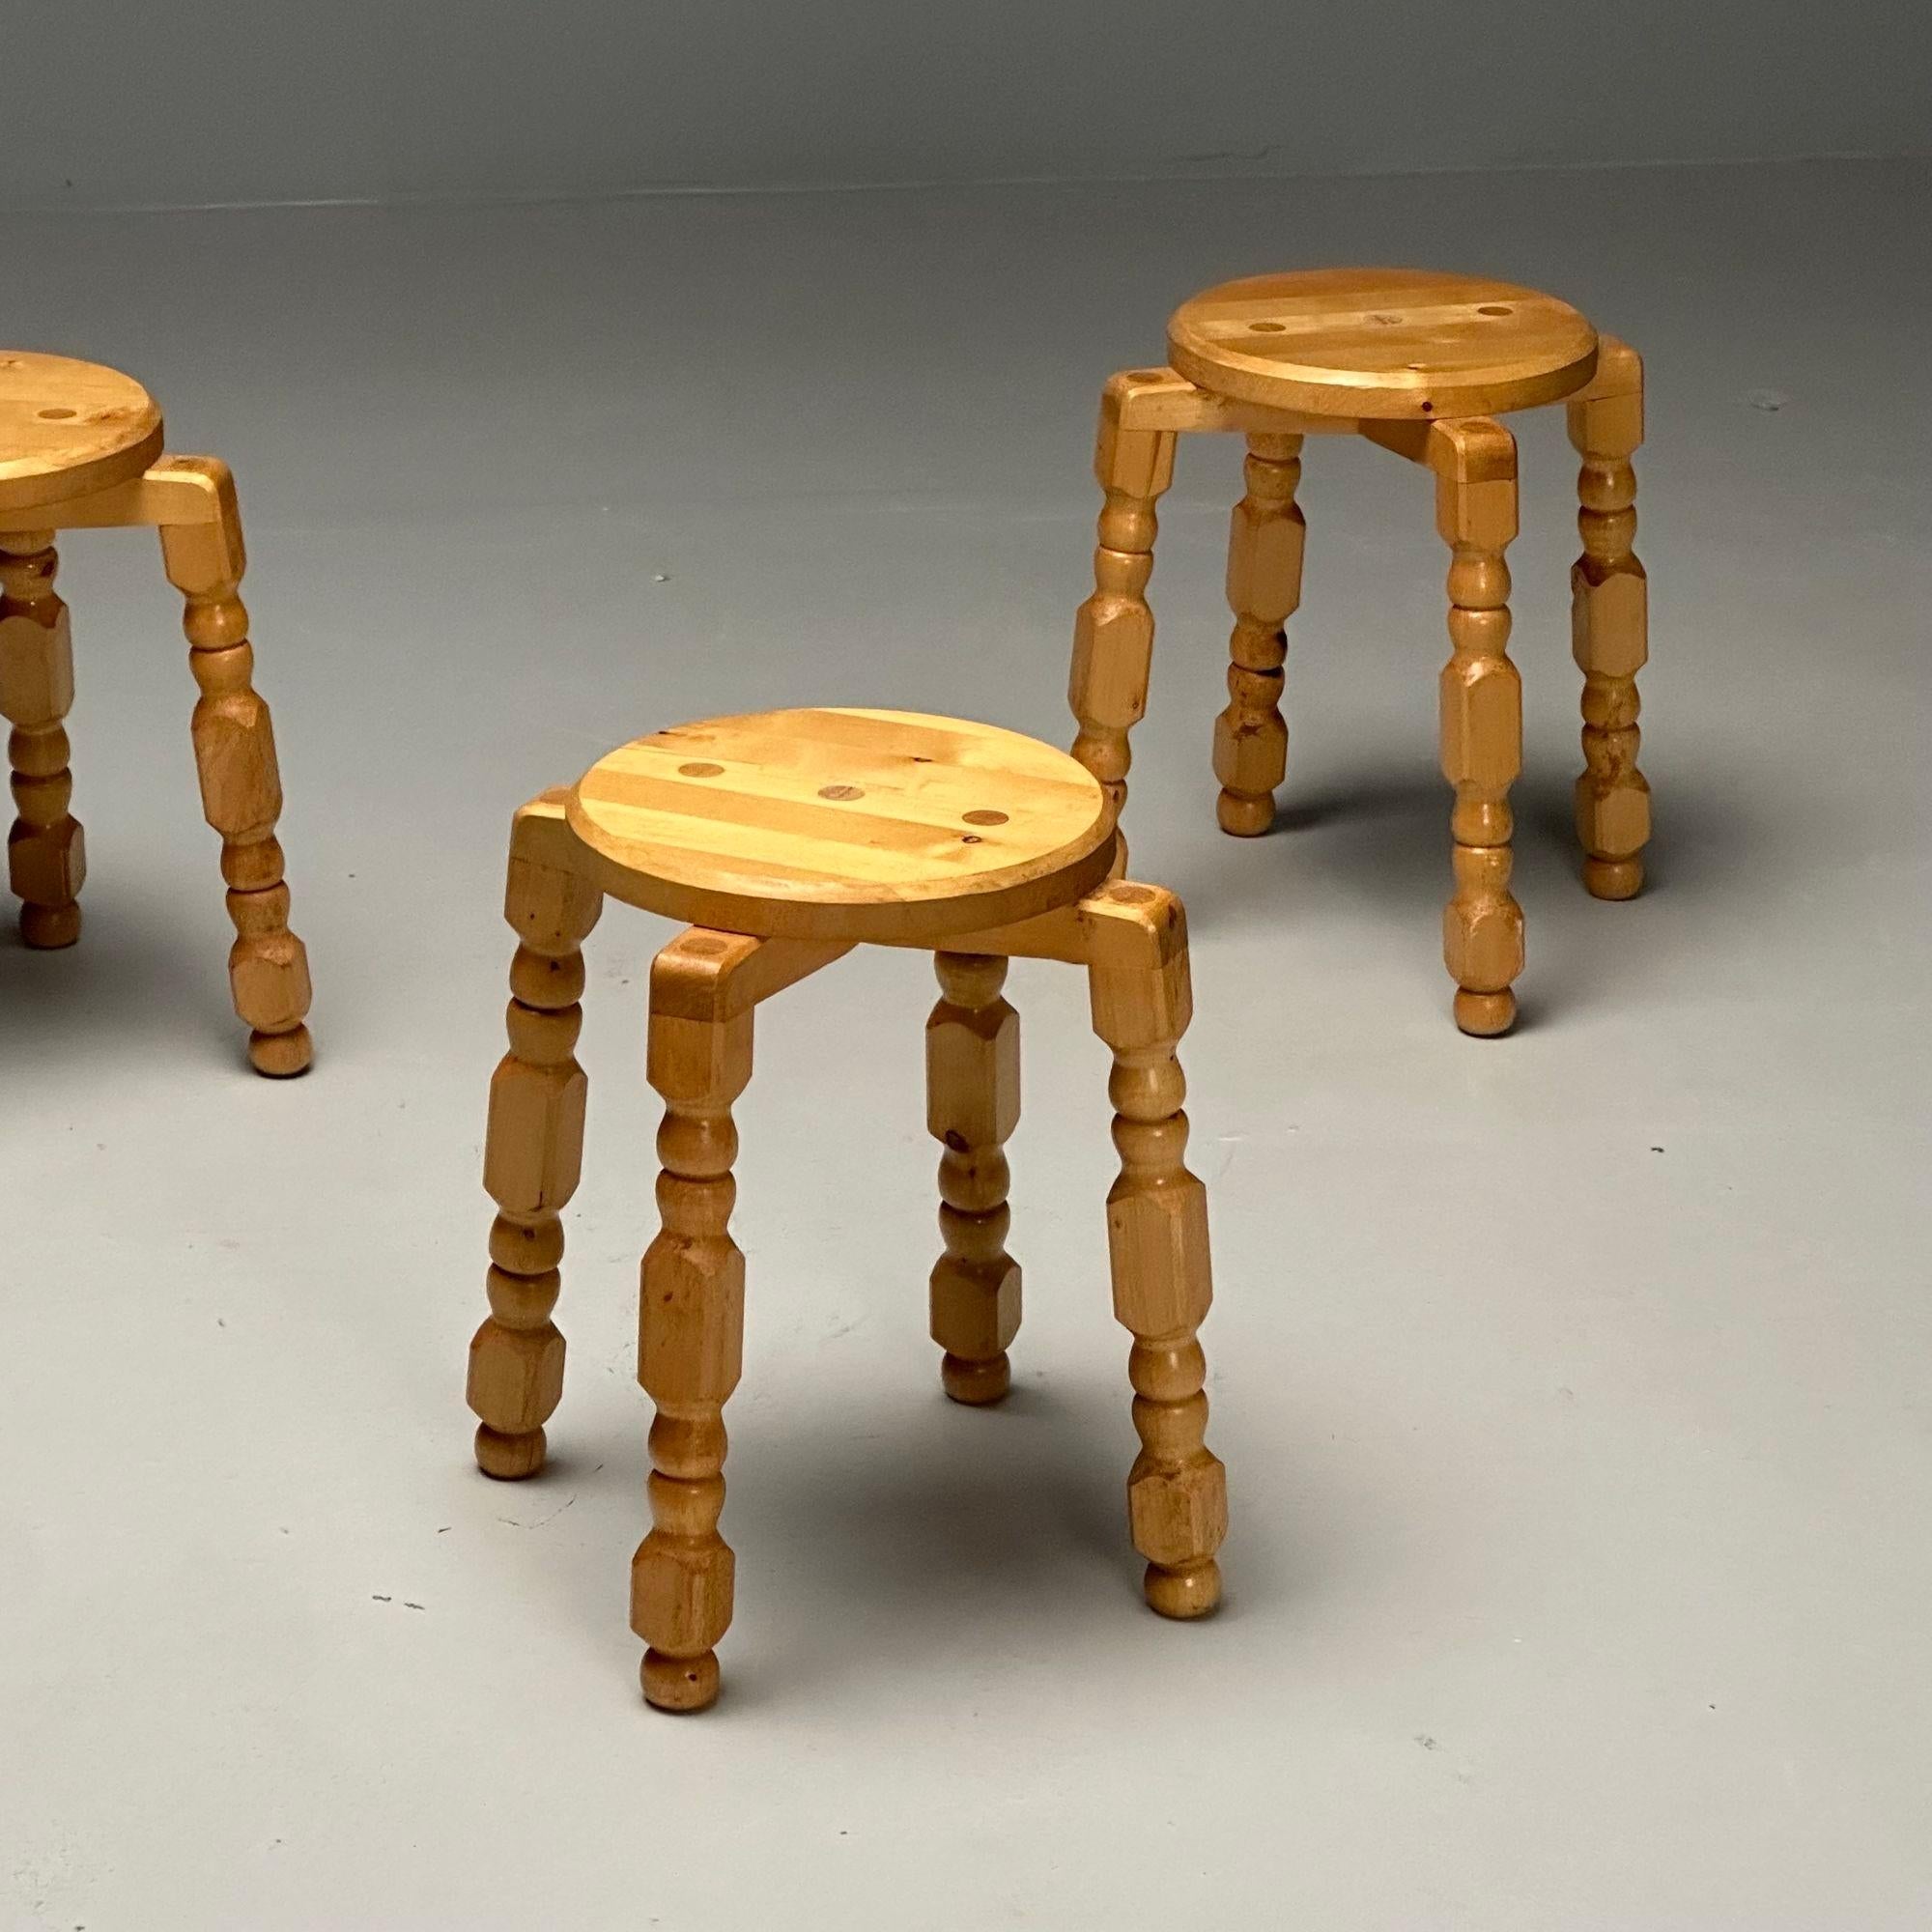 Swedish Mid-Century Modern, Playful Stools, Birch, Sweden, 1960s In Good Condition For Sale In Stamford, CT